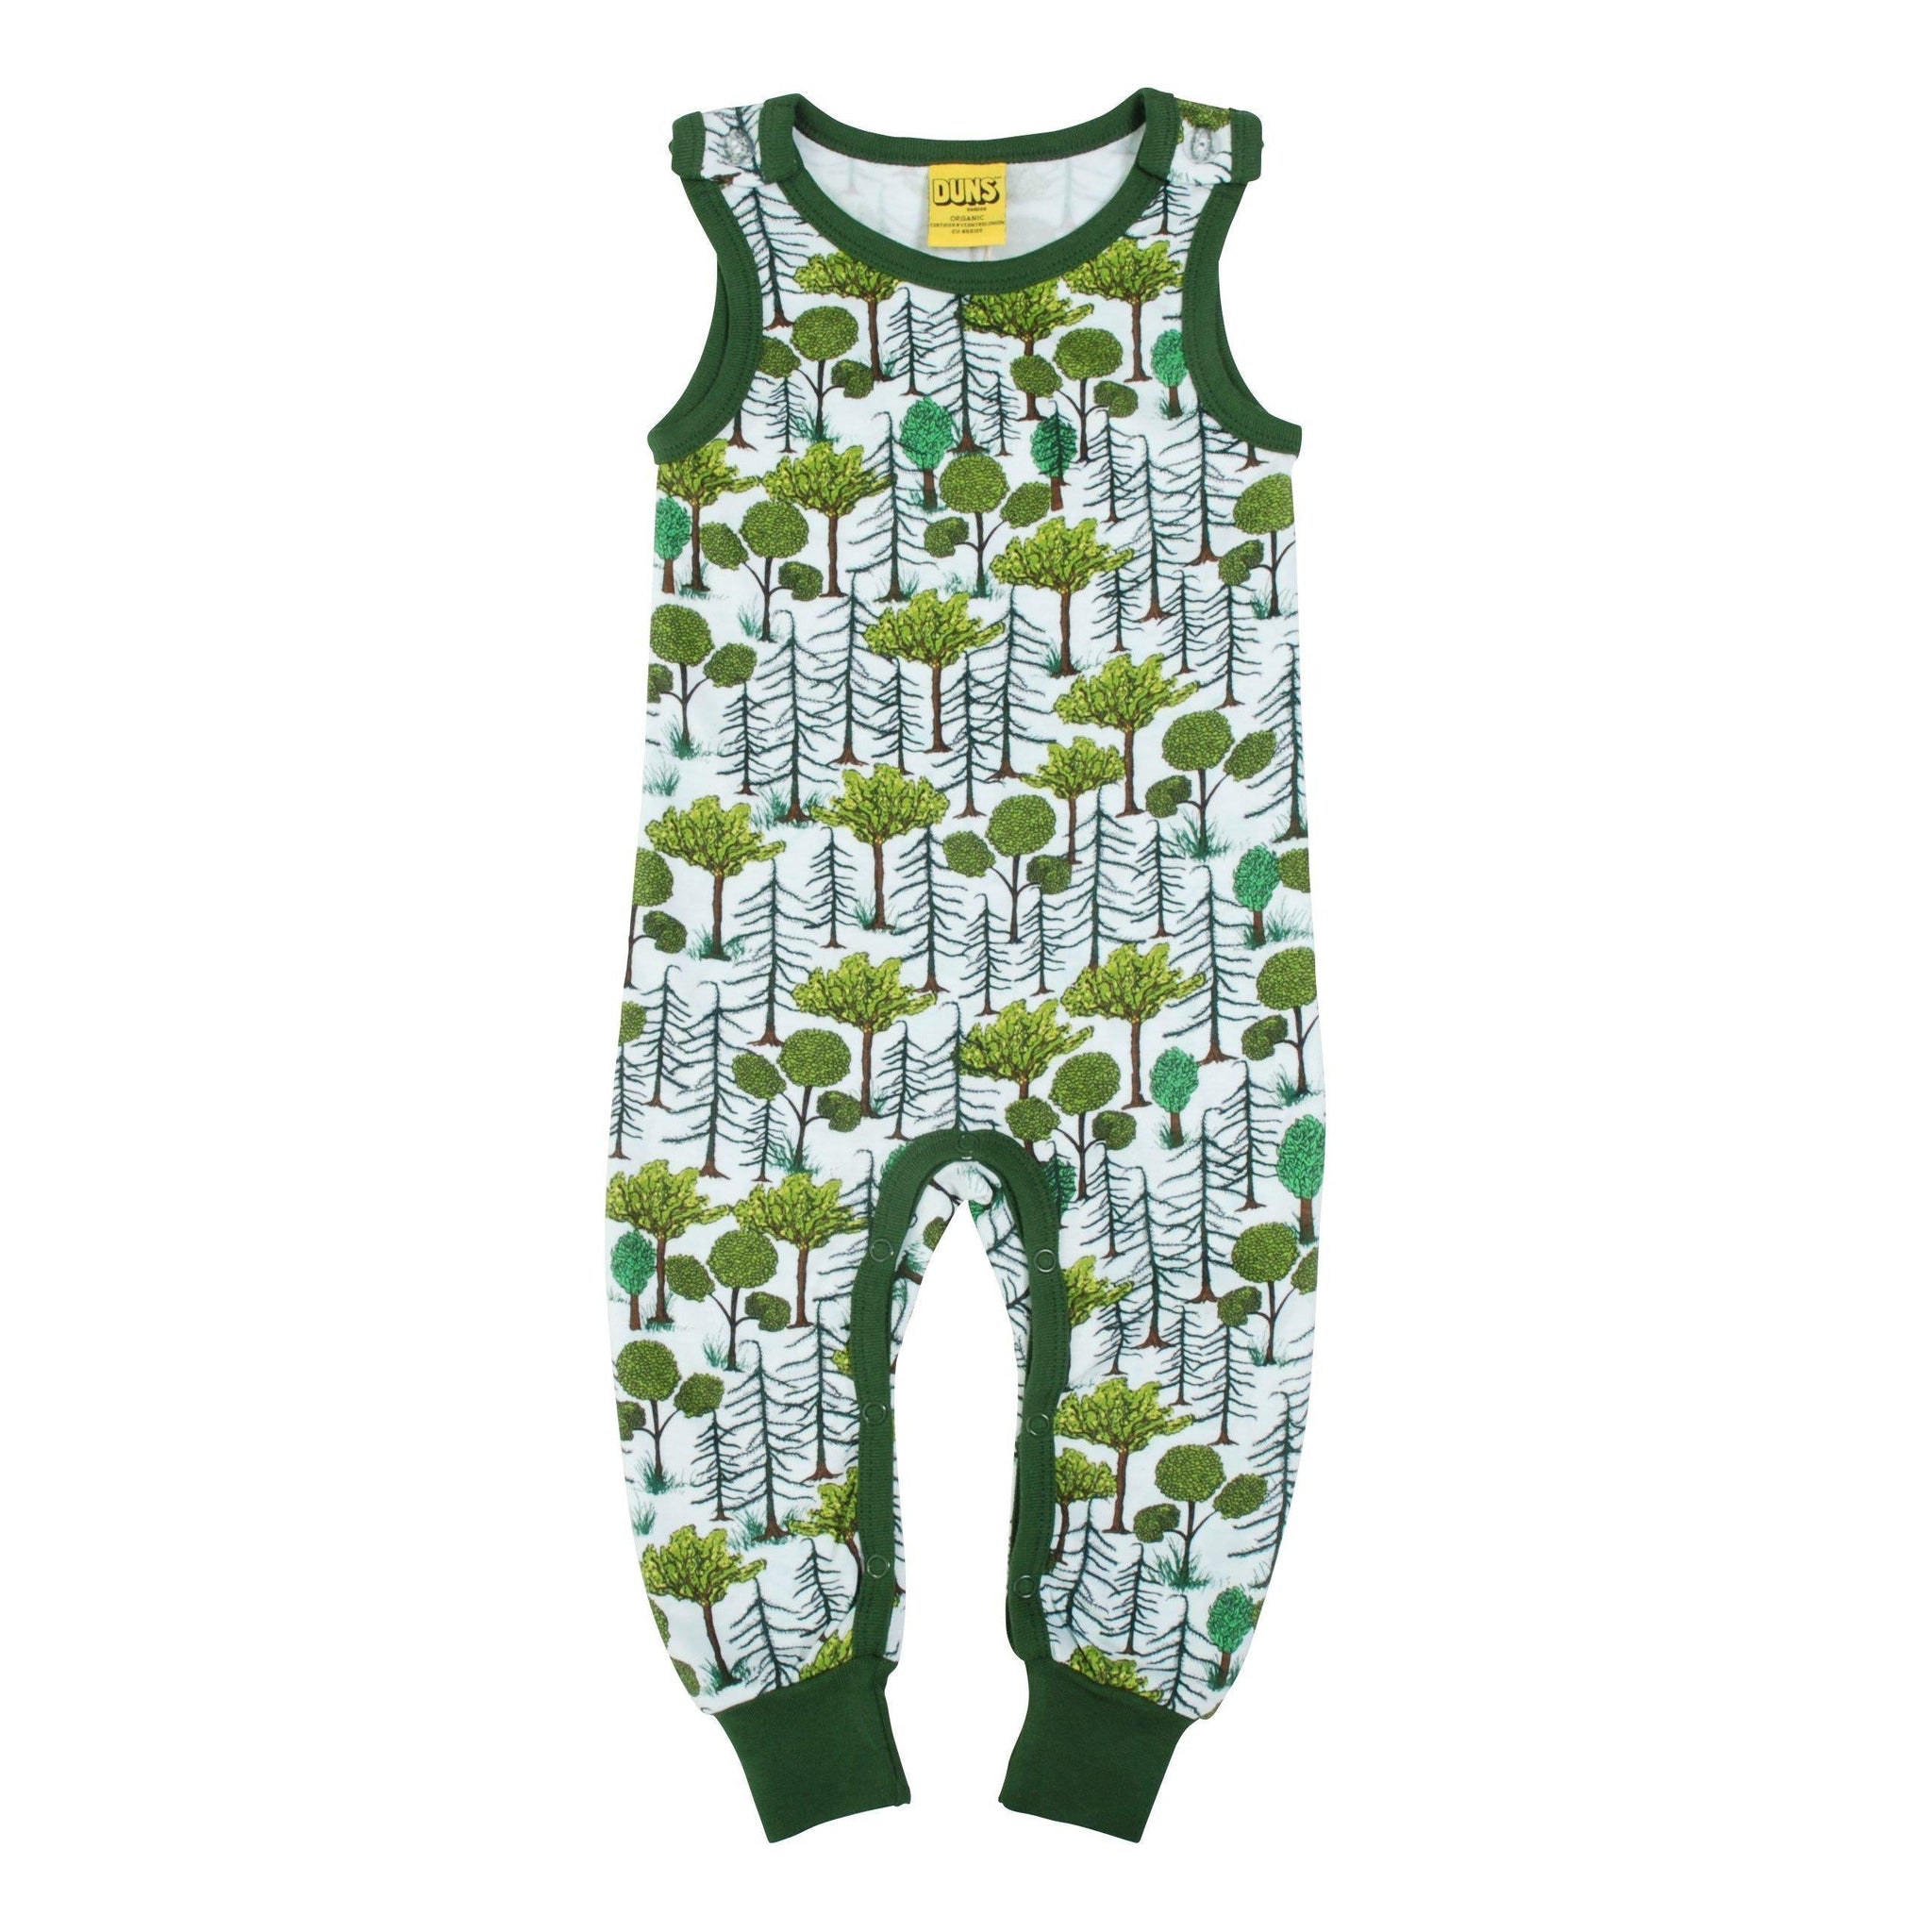 DUNS Sweden - Enchanted Forest Dungarees (9 Months)